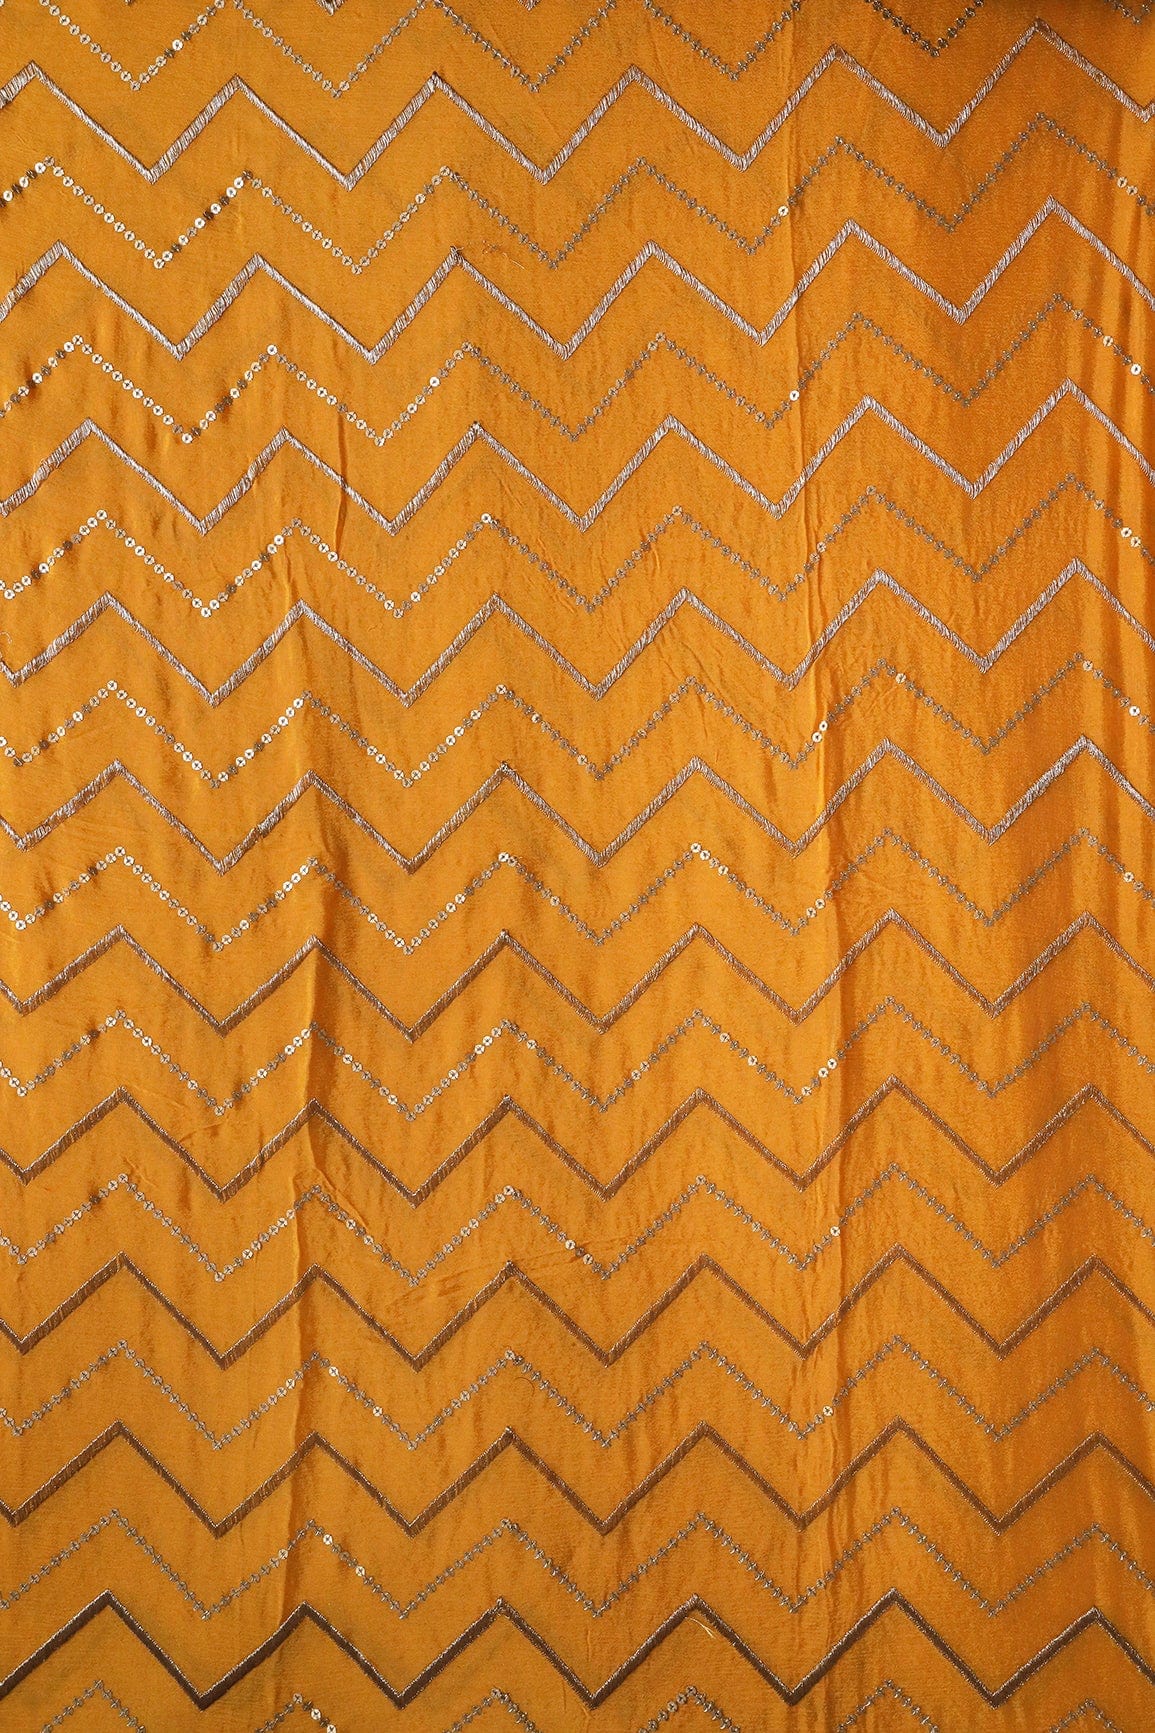 doeraa Embroidery Fabrics 4 Meter Cut Piece Of Gold Zari With Gold Sequins Chevron Embroidery Work On Yellow Chinnon Chiffon Fabric